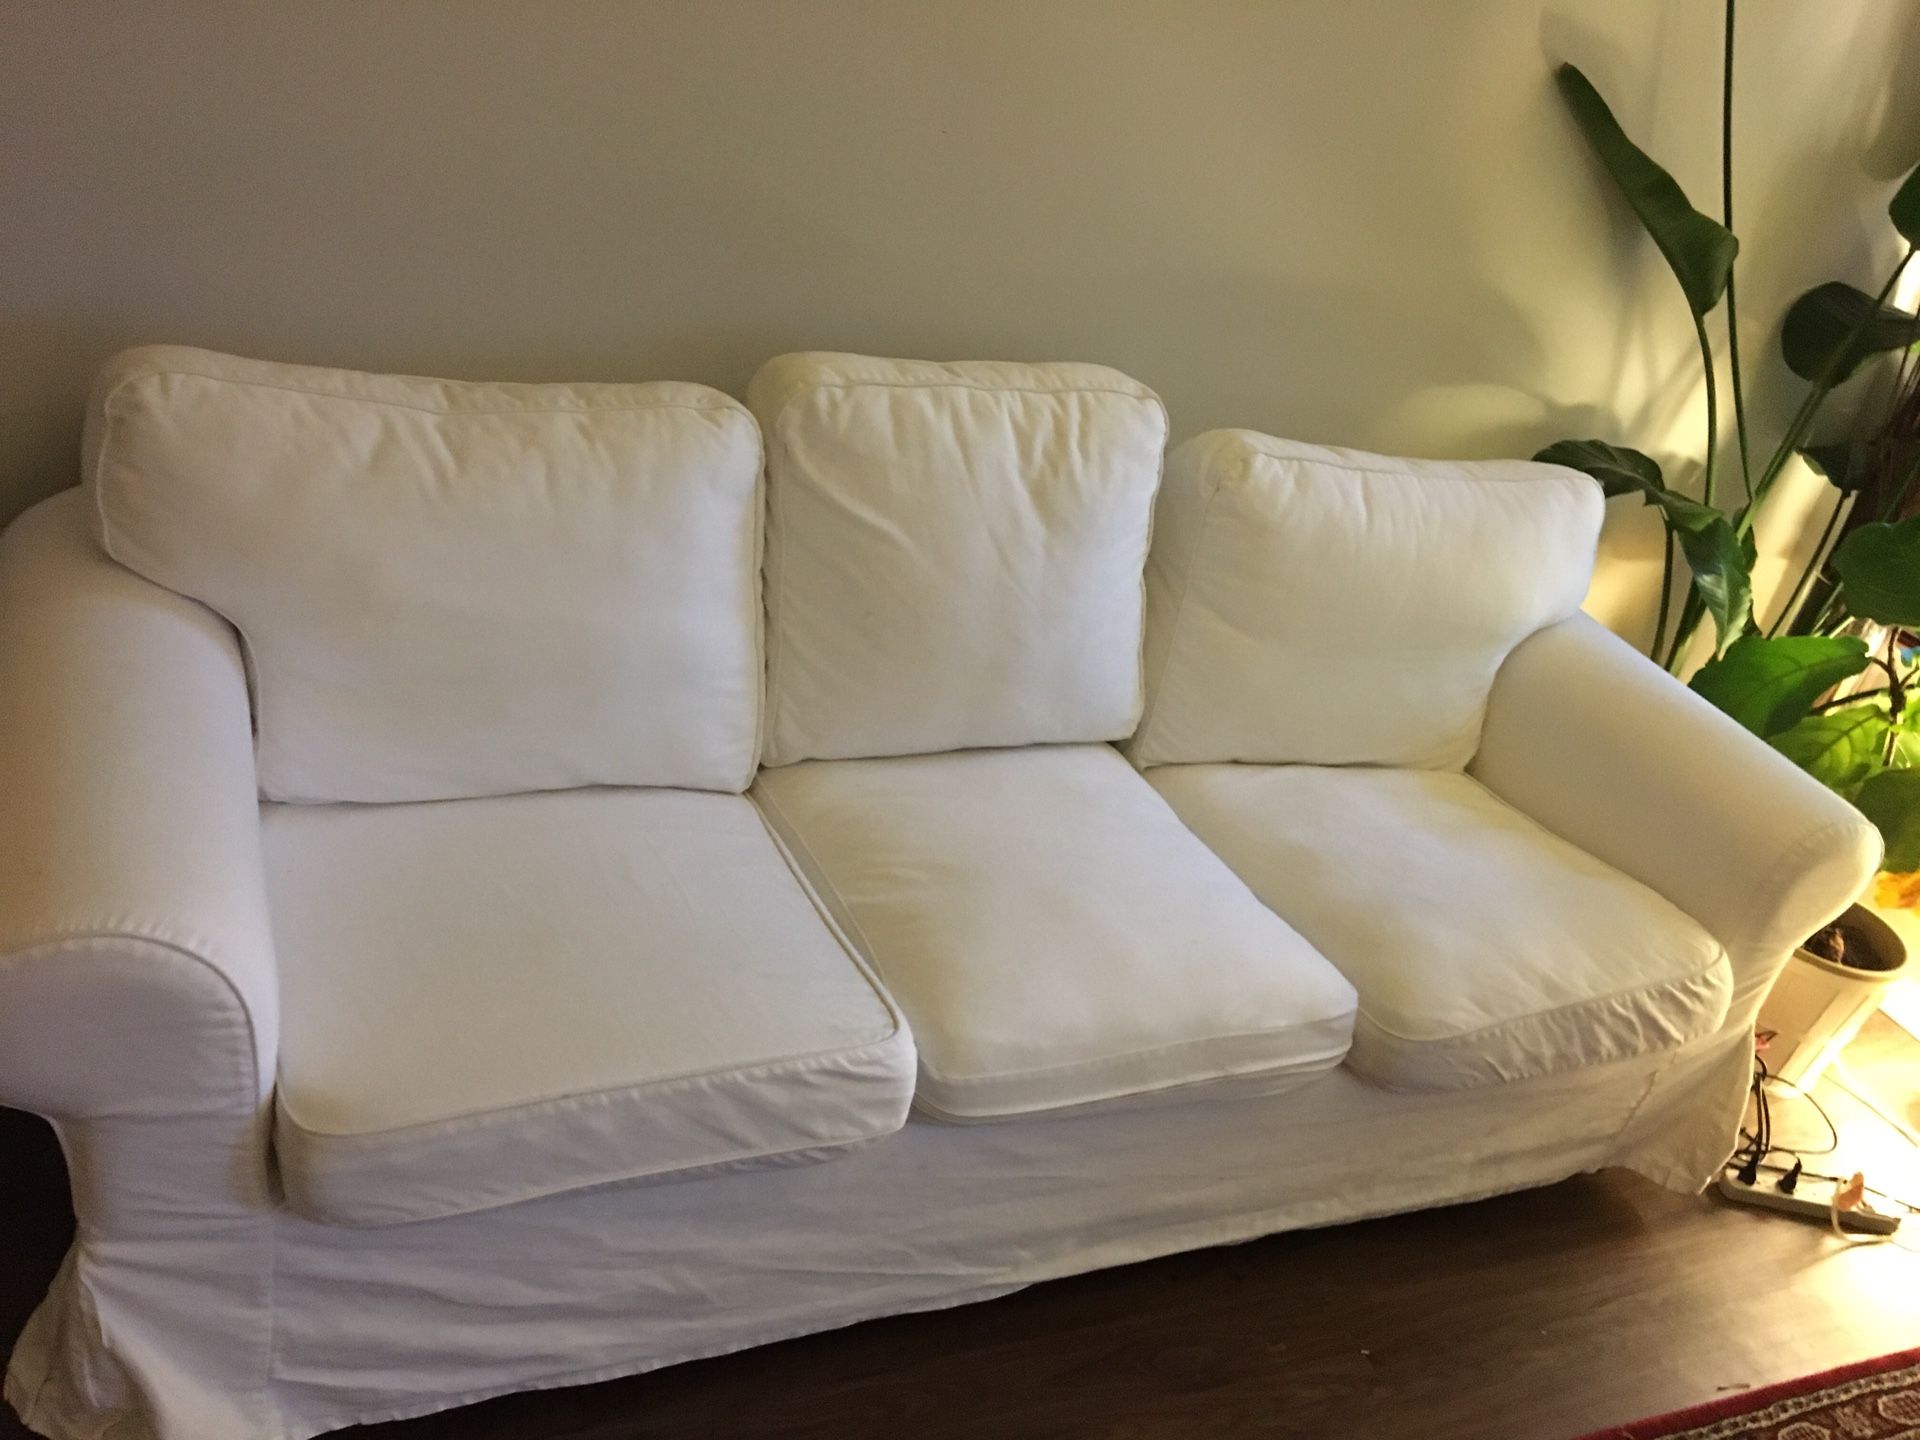 IKEA couch sofa white and grey covers (2) included